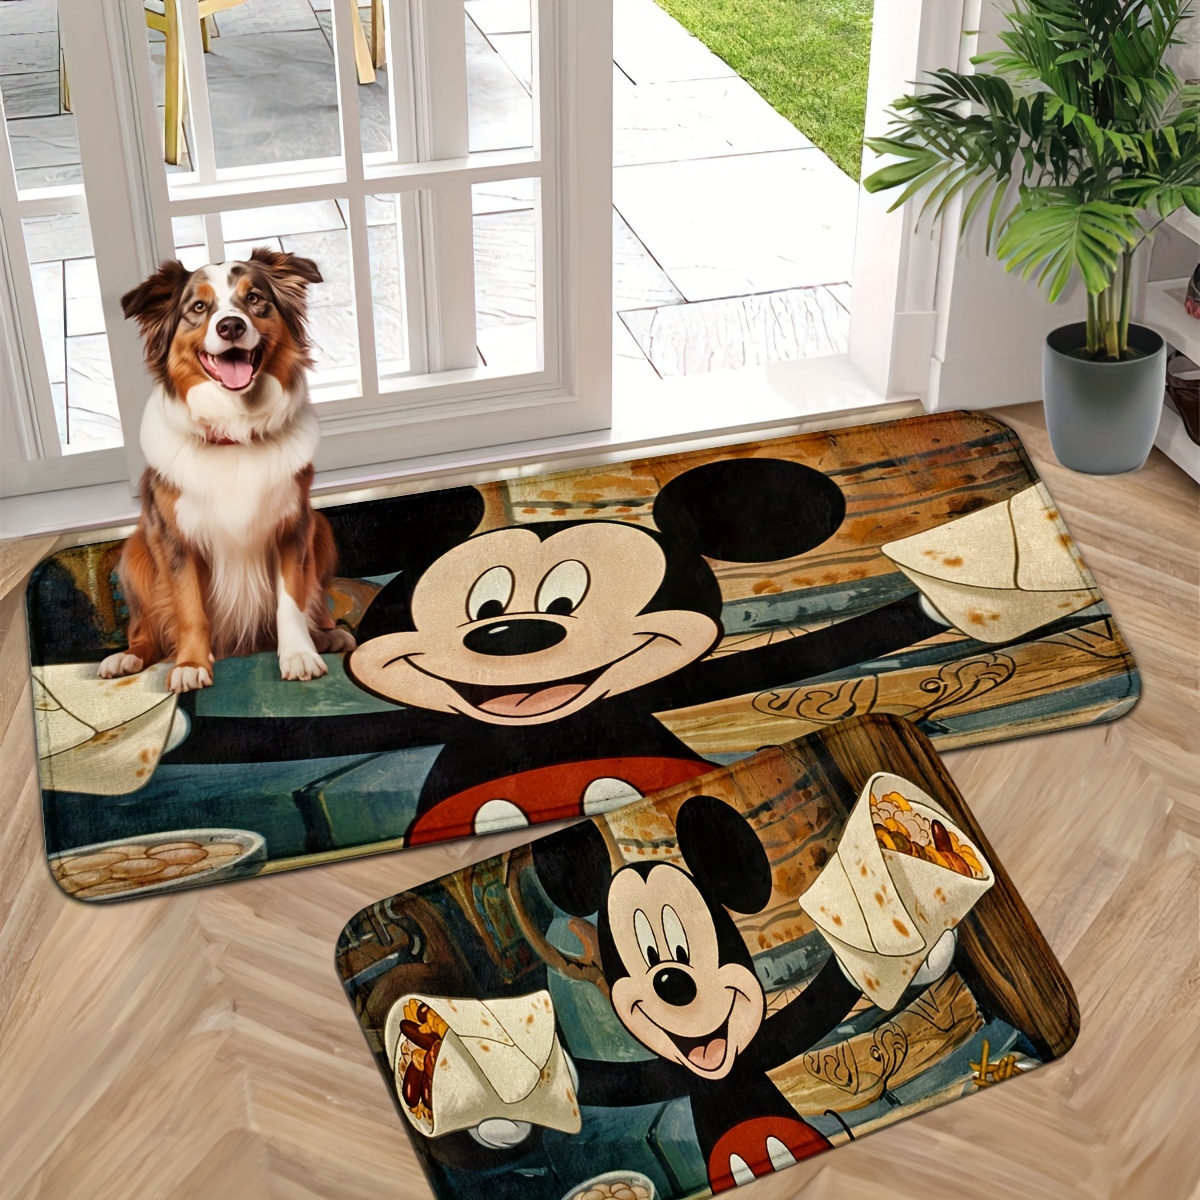 

1/2pcs Characters Of Mouse Pattern Indoor Kitchen Carpet Rug With Anti-slip Bottom And Soft Thick Fluffy Surface, Machine Washable Comfortable And Soft Floor Mat, Indoor Decorative Entryway Carpet